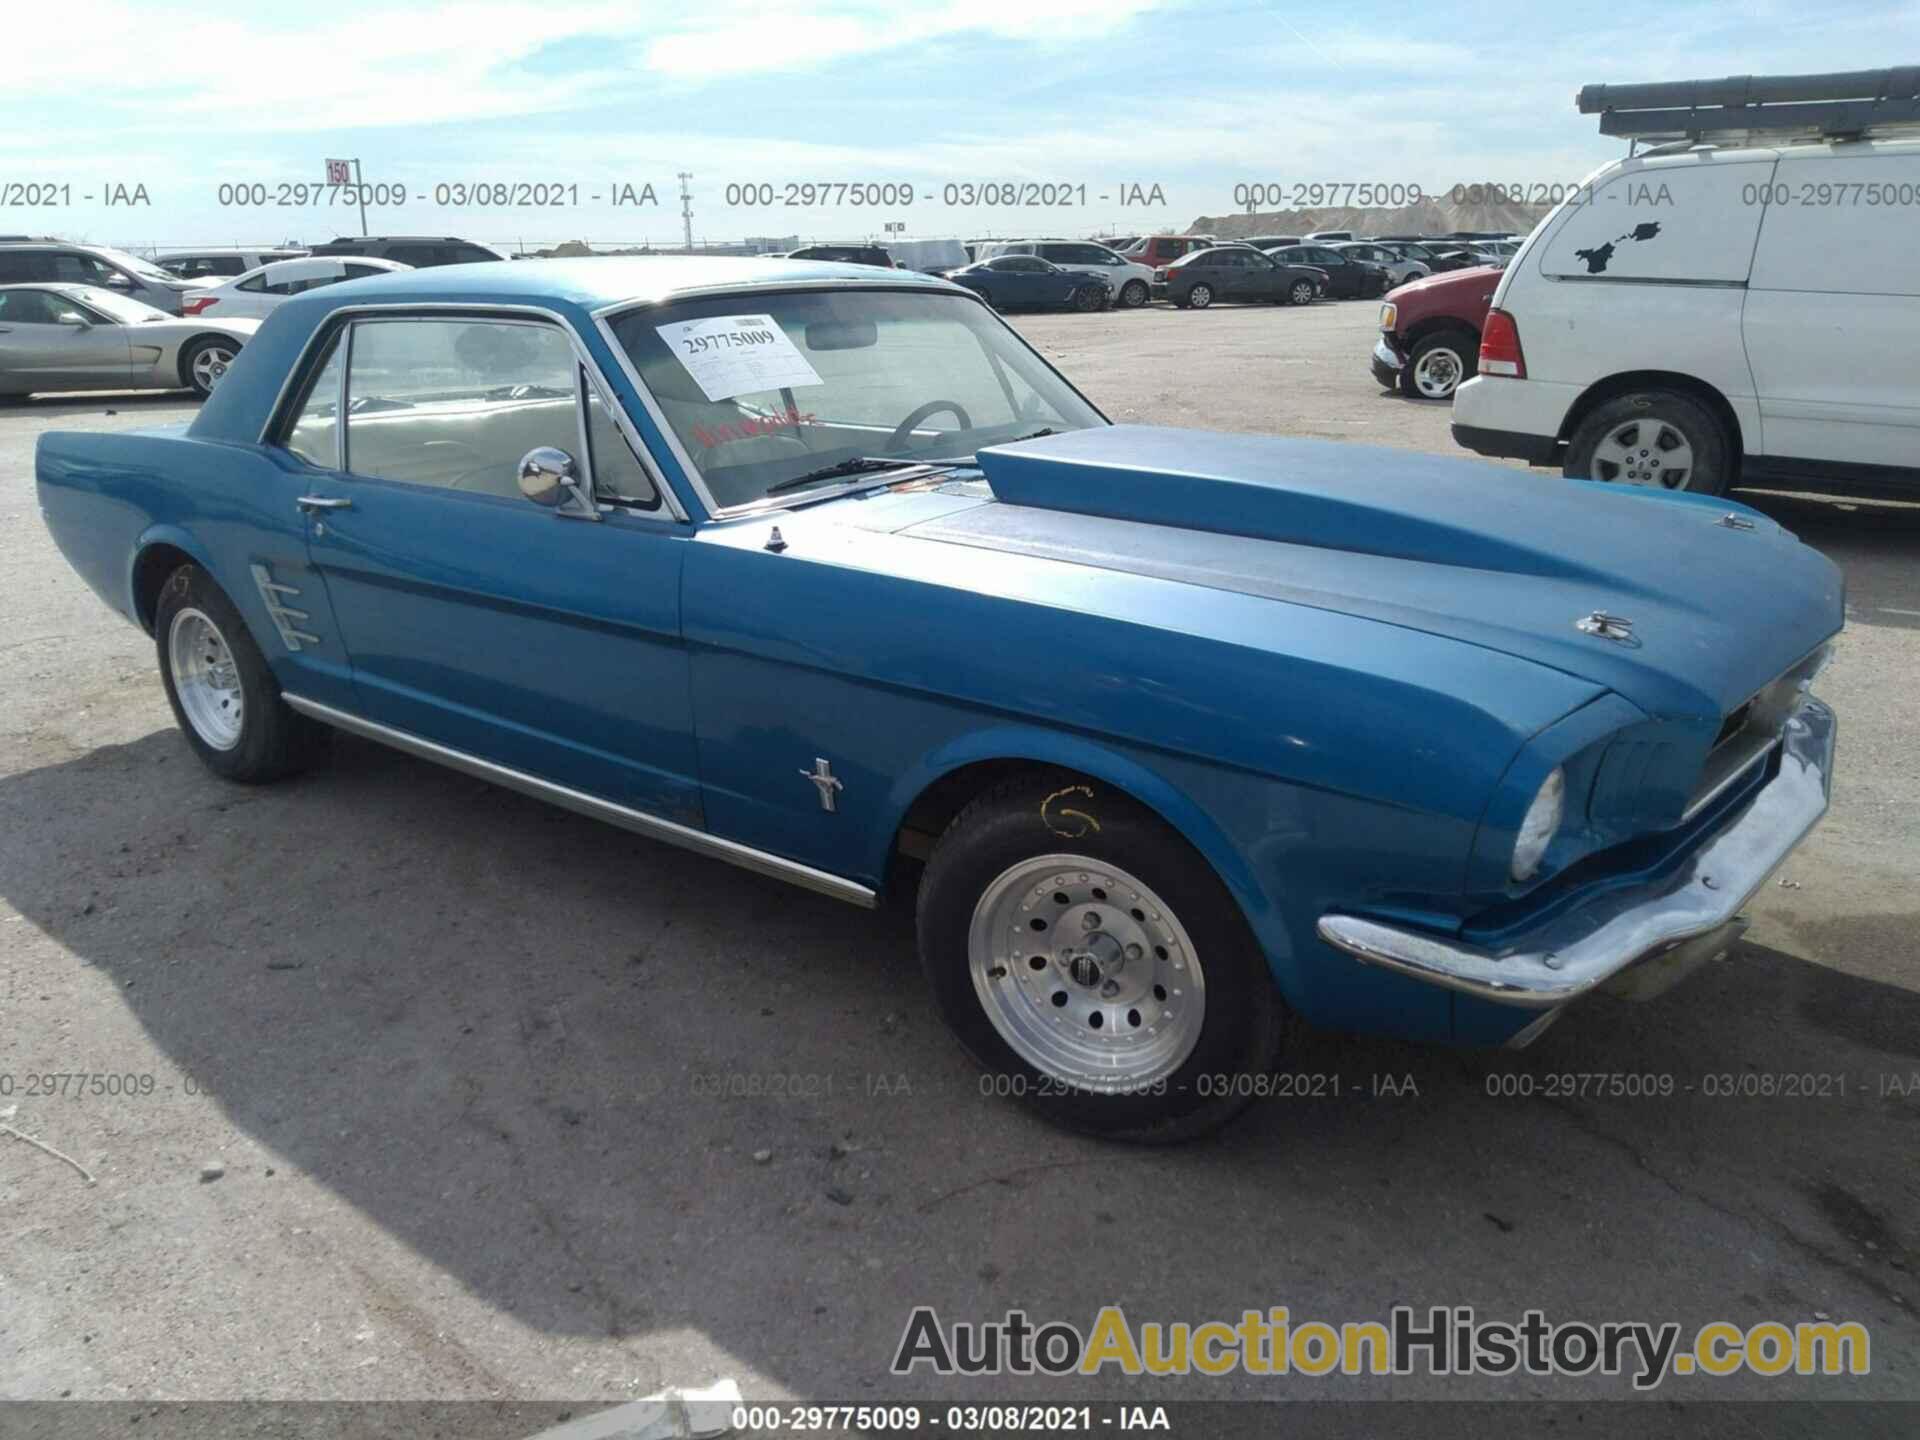 FORD MUSTANG, 6F07T271909